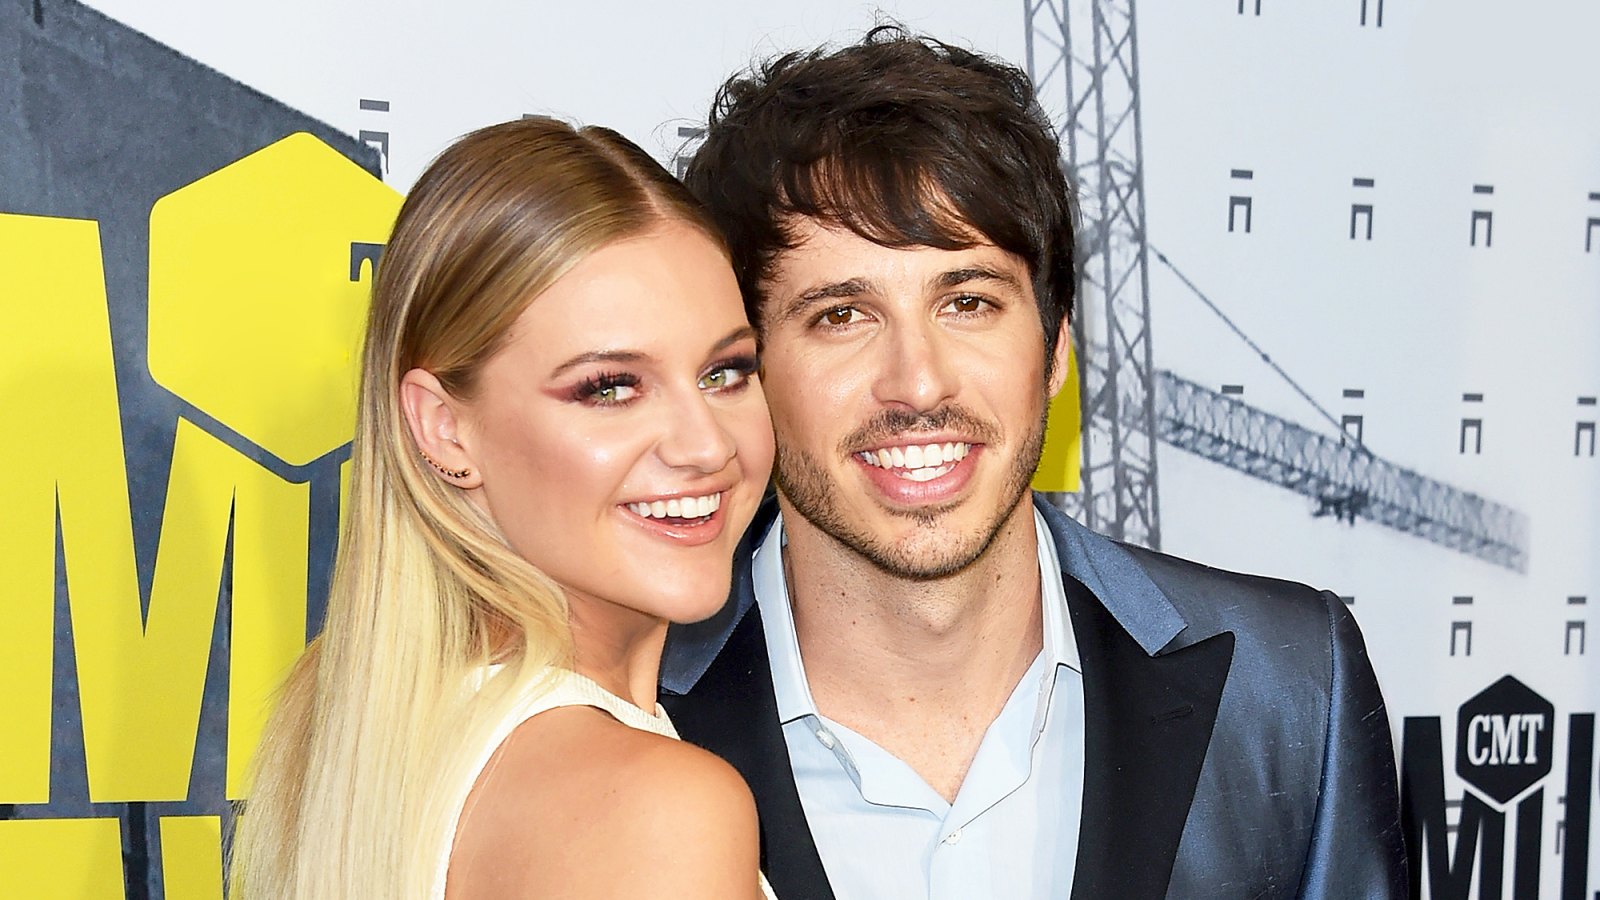 Kelsea Ballerini and Morgan Evans attend the 2017 CMT Music Awards at the Music City Center on June 7, 2017 in Nashville, Tennessee.